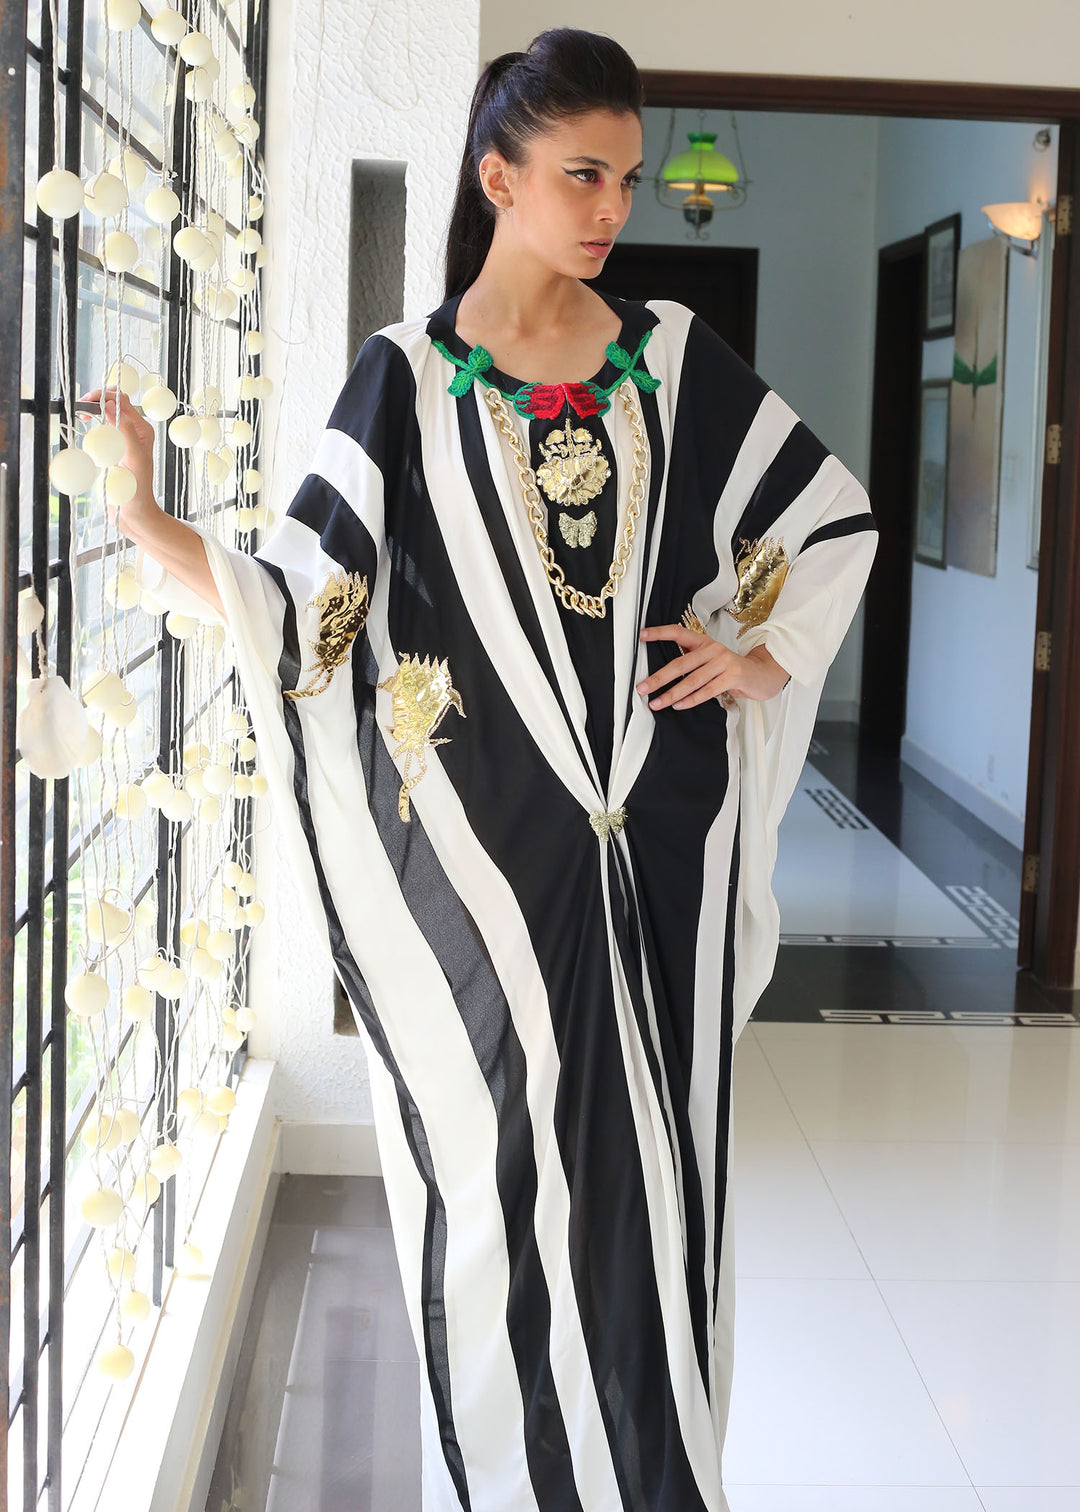 Zuri Collection: Ali Xeeshan's Captivating Charm